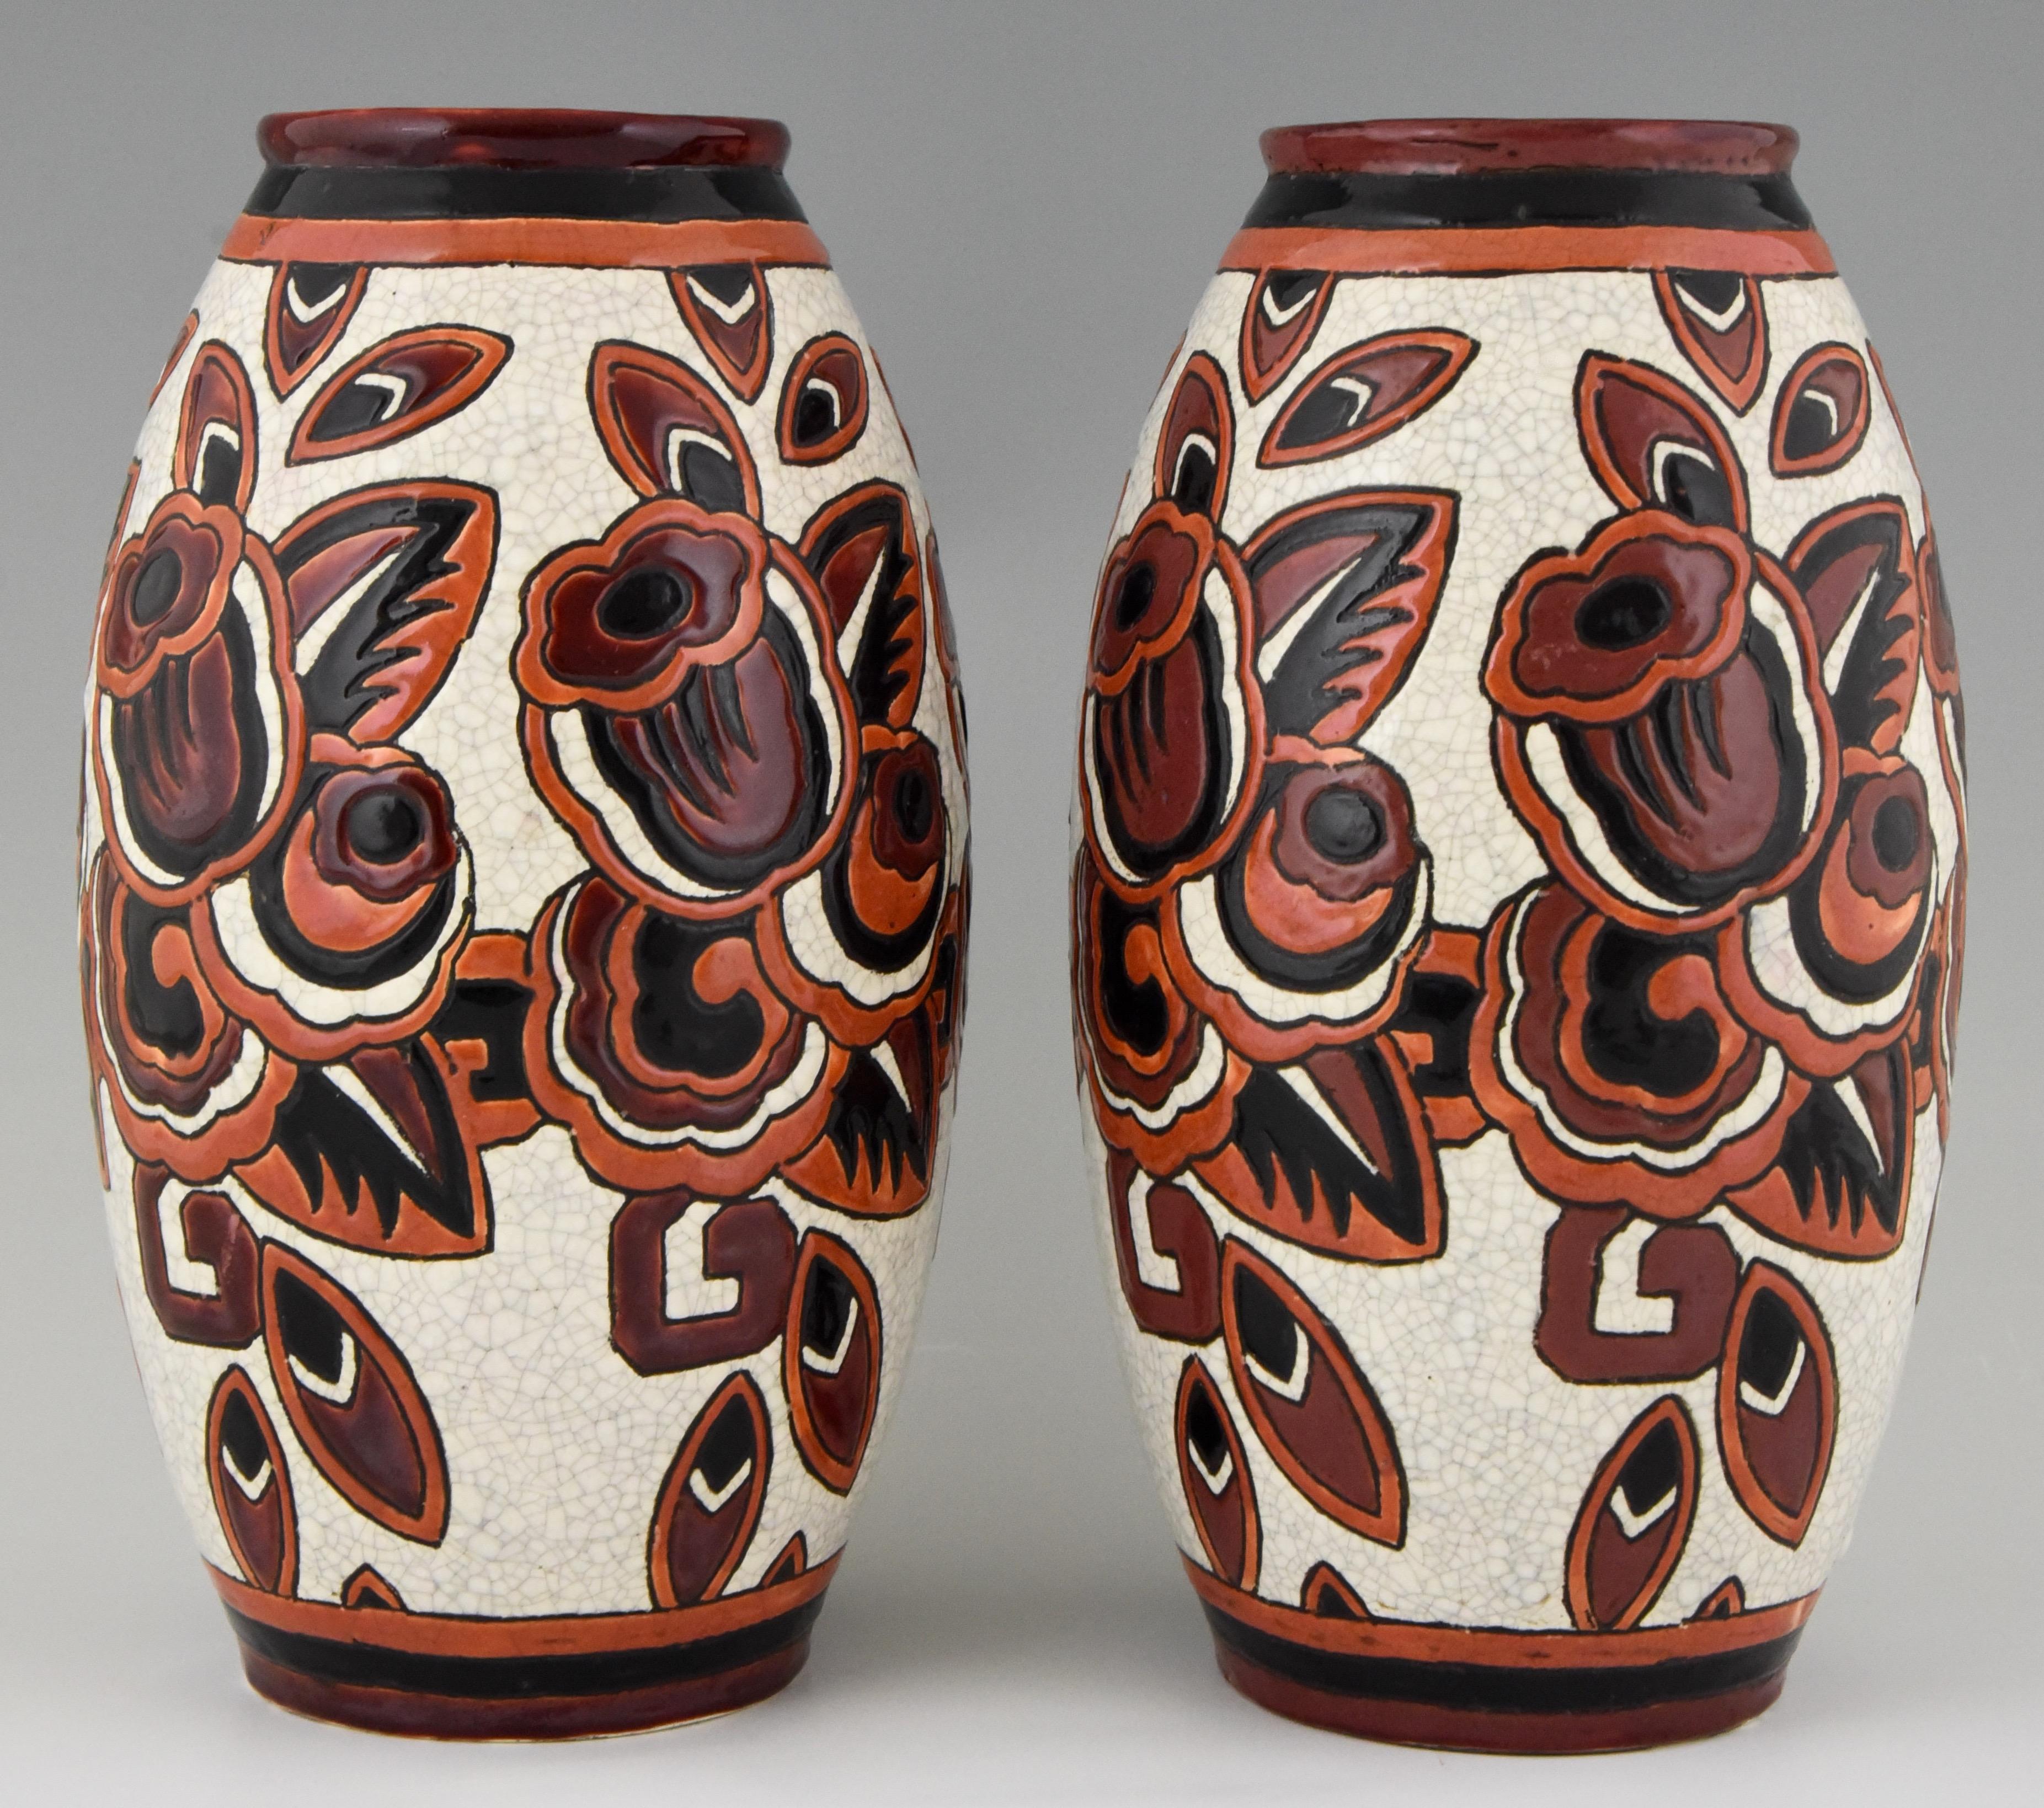 Lovely pair of Art Deco craquelé vases with flowers in the colors orange, black, brown and white. Designed in Belgium in 1926-1927 by Charles Catteau for Boch Frères. Both vases are stamped and numbered.